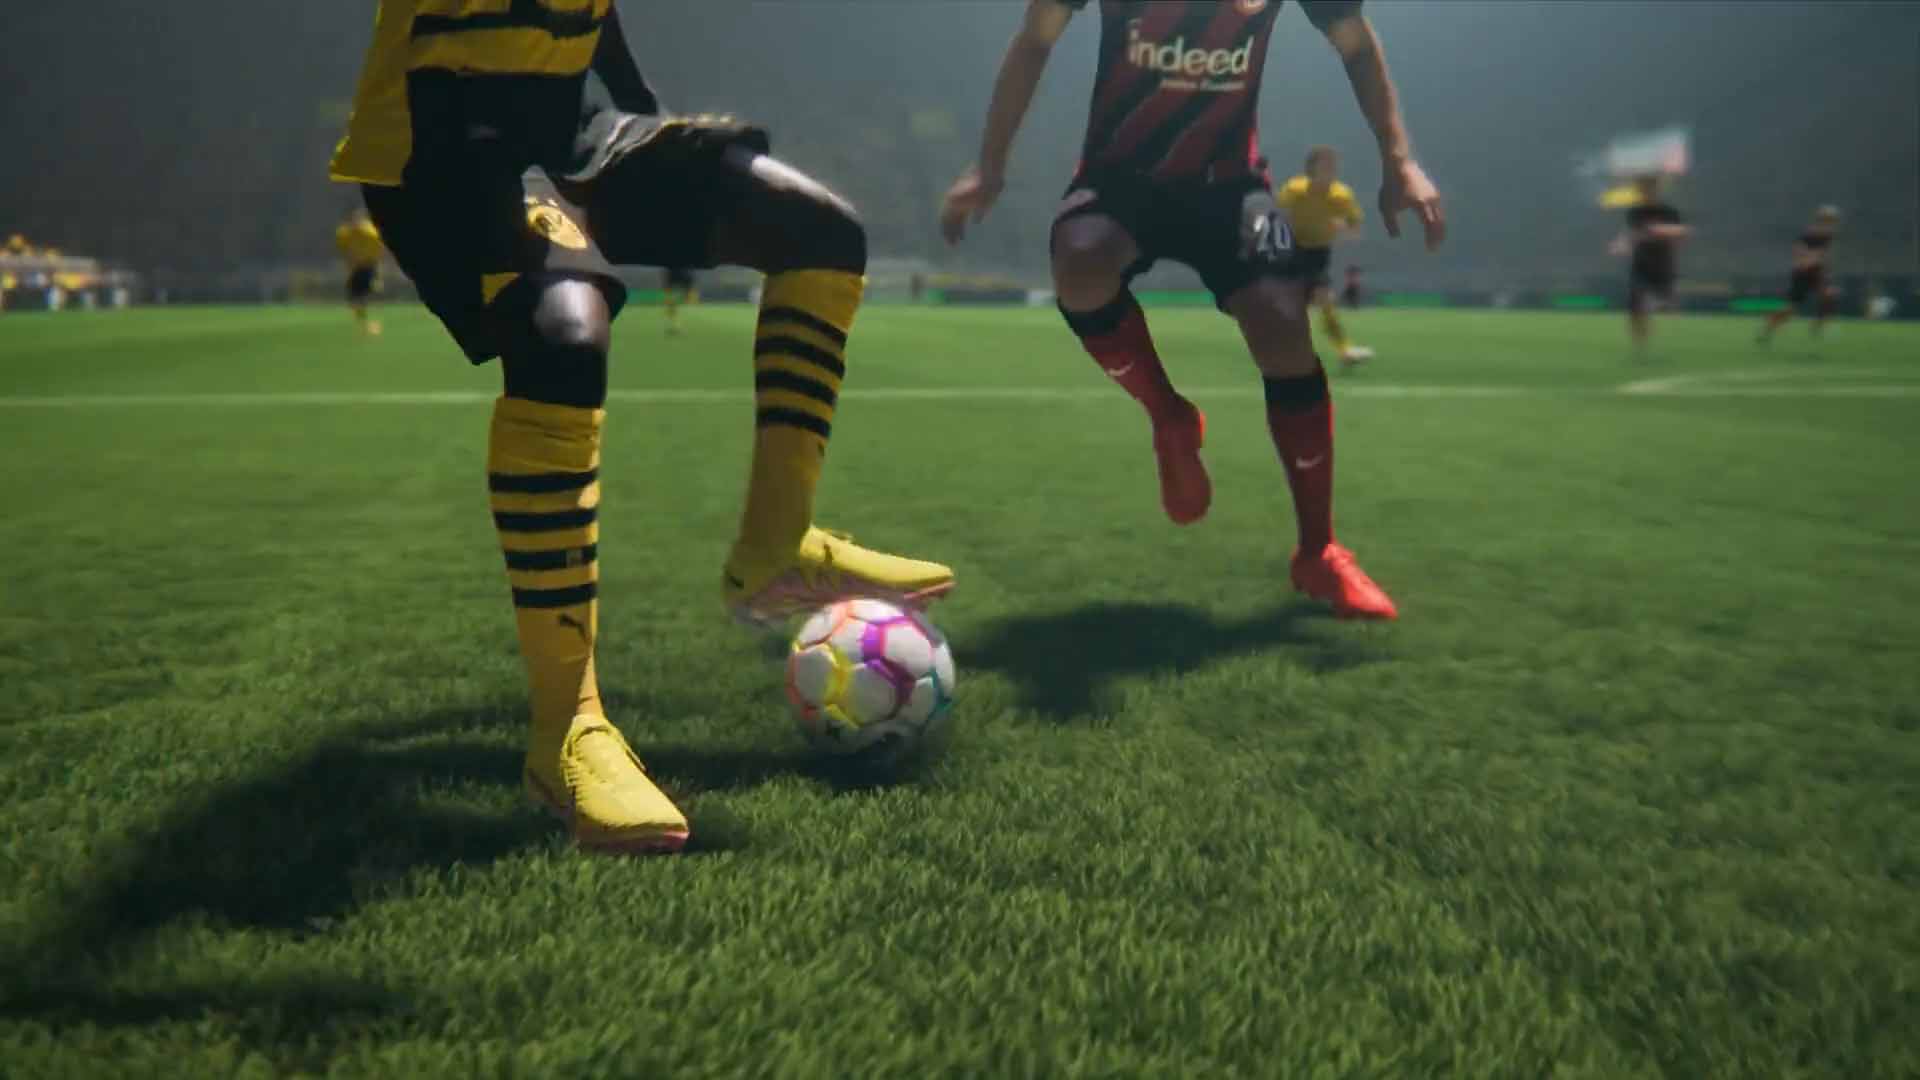 EA Sports FC 24 - Official Gameplay and New Features! 